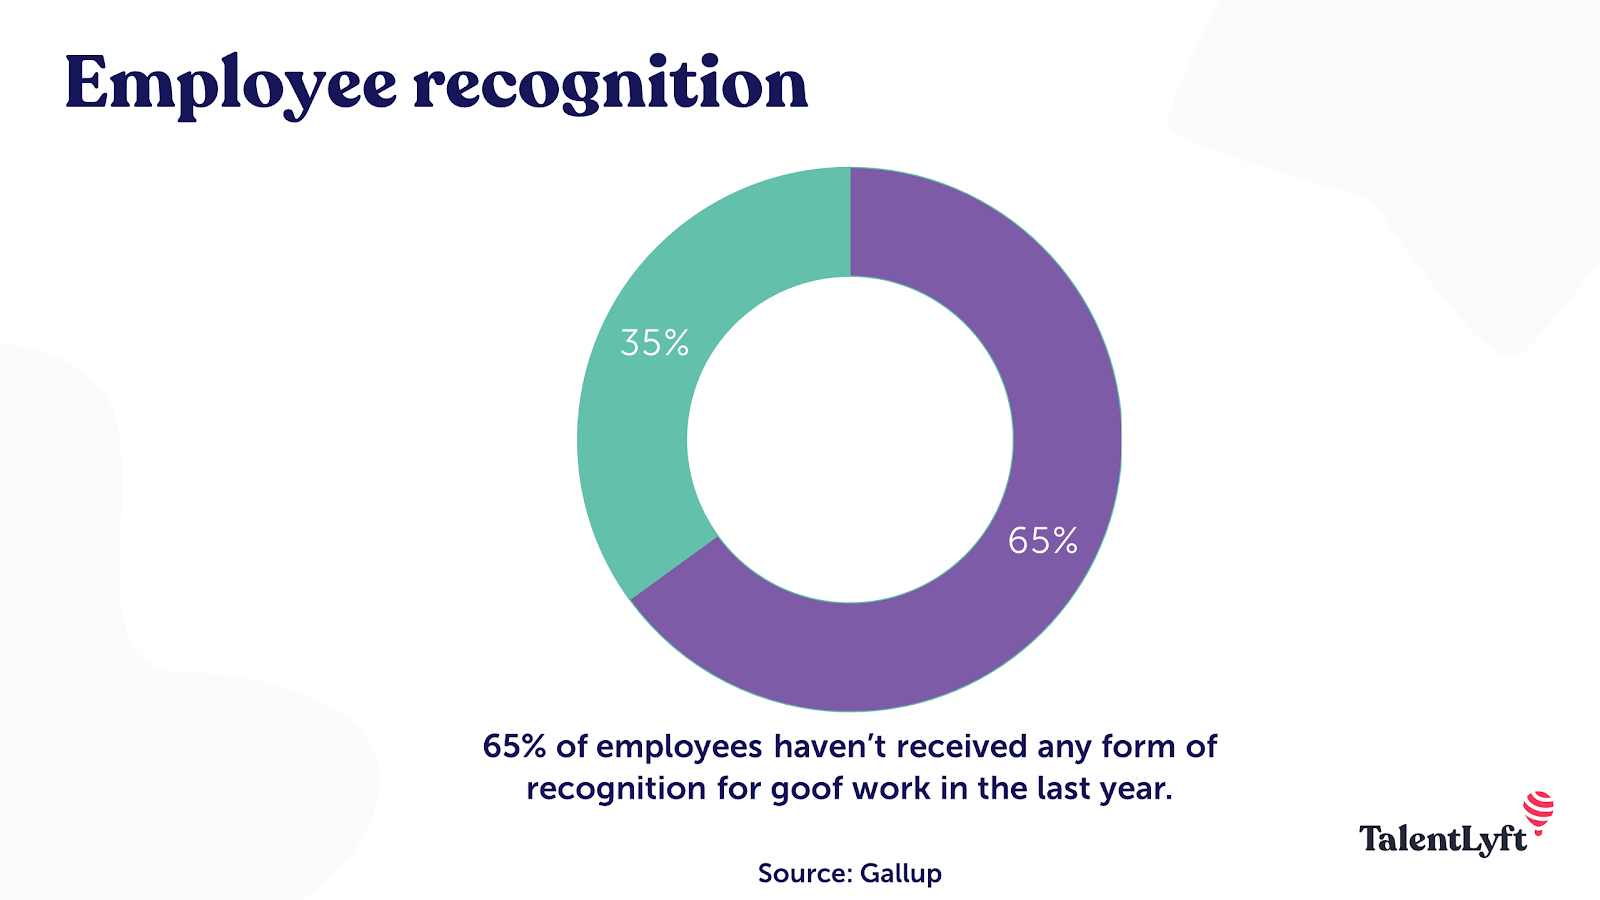 Employee recognition importance